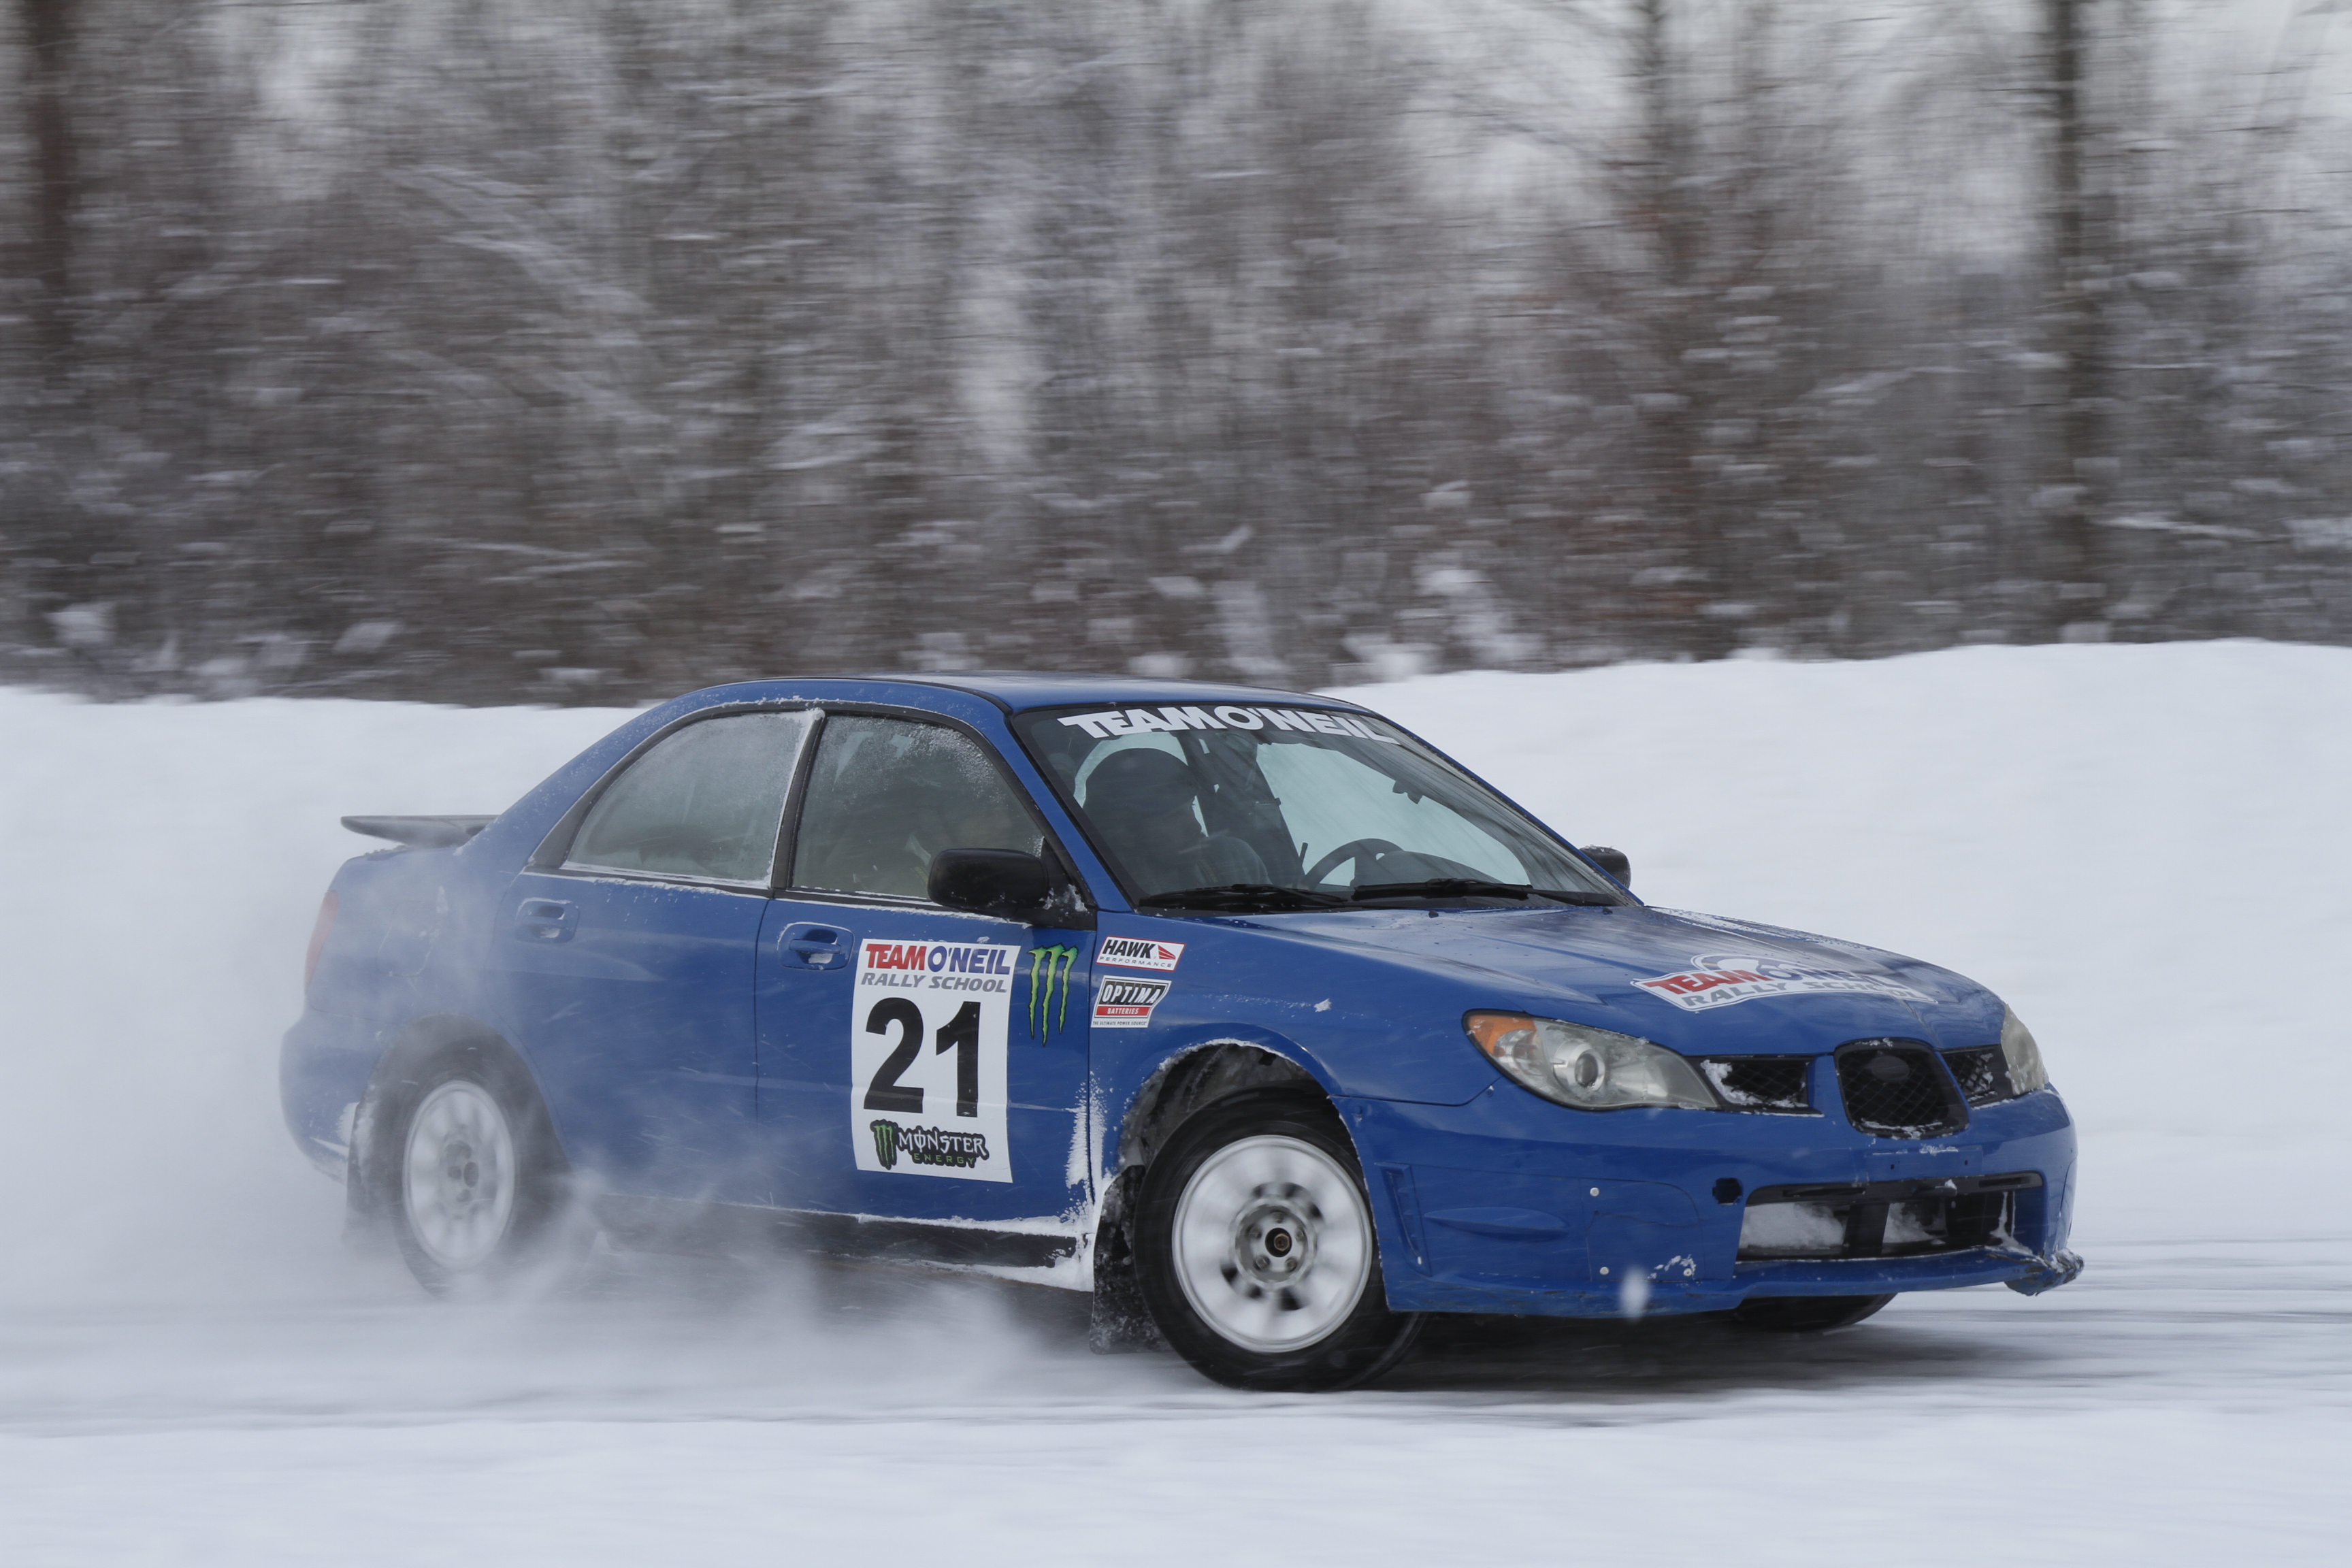 Blue Subaru sliding on icy roads at Team O'Neil Rally School showing tractionized tires.